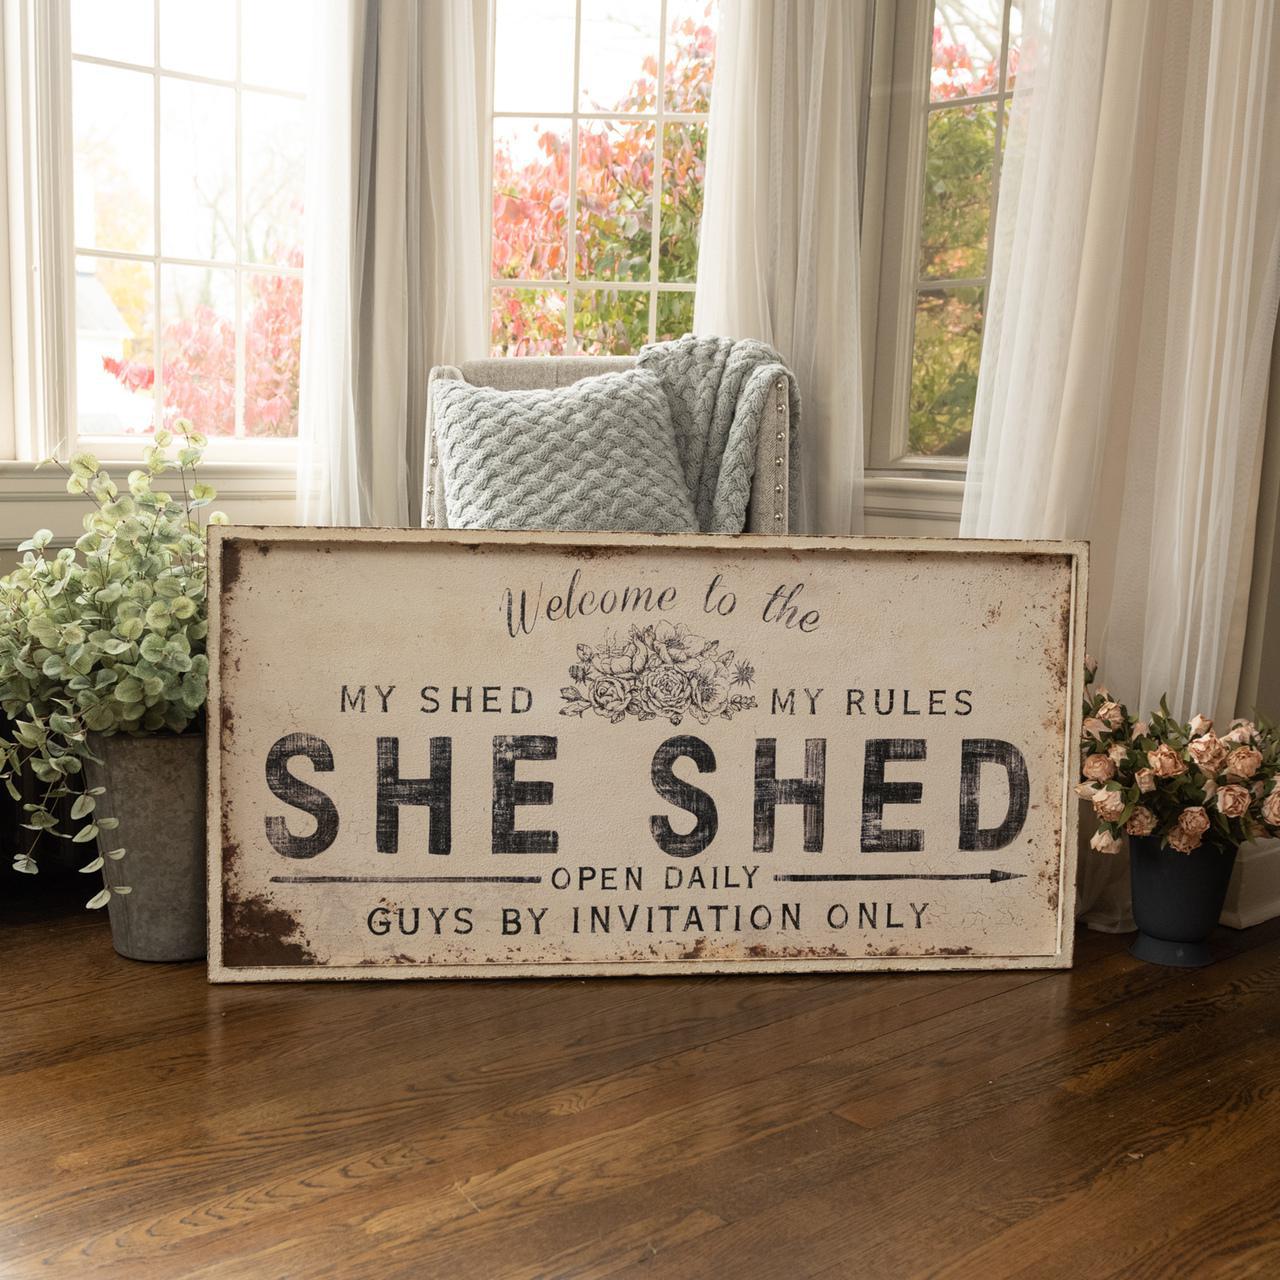 She Shed Metal Sign